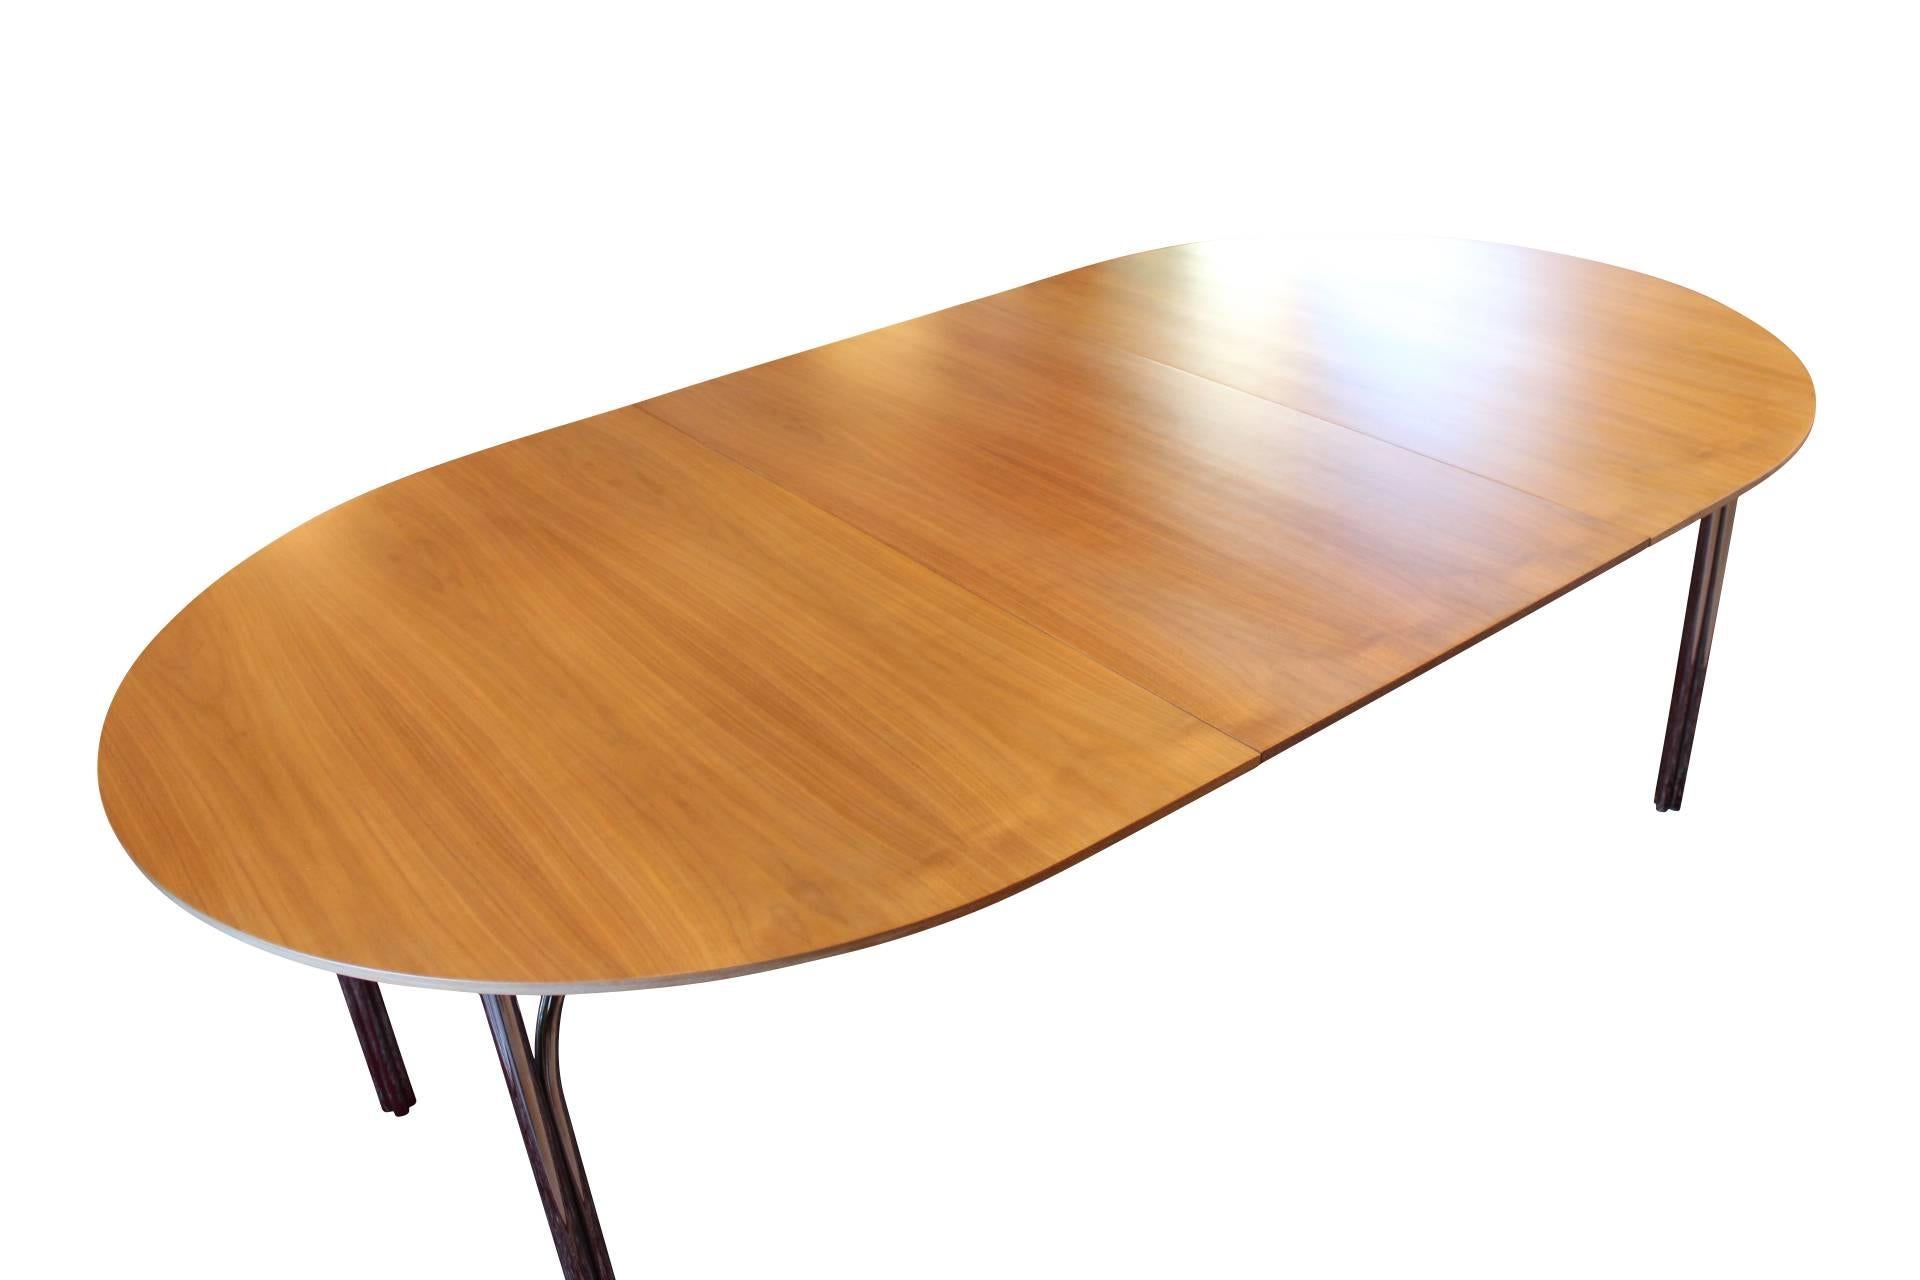 Scandinavian Modern Tobago Dining Table, Model 8311, by Nanna Ditzel and Fredericia Furniture, 1993